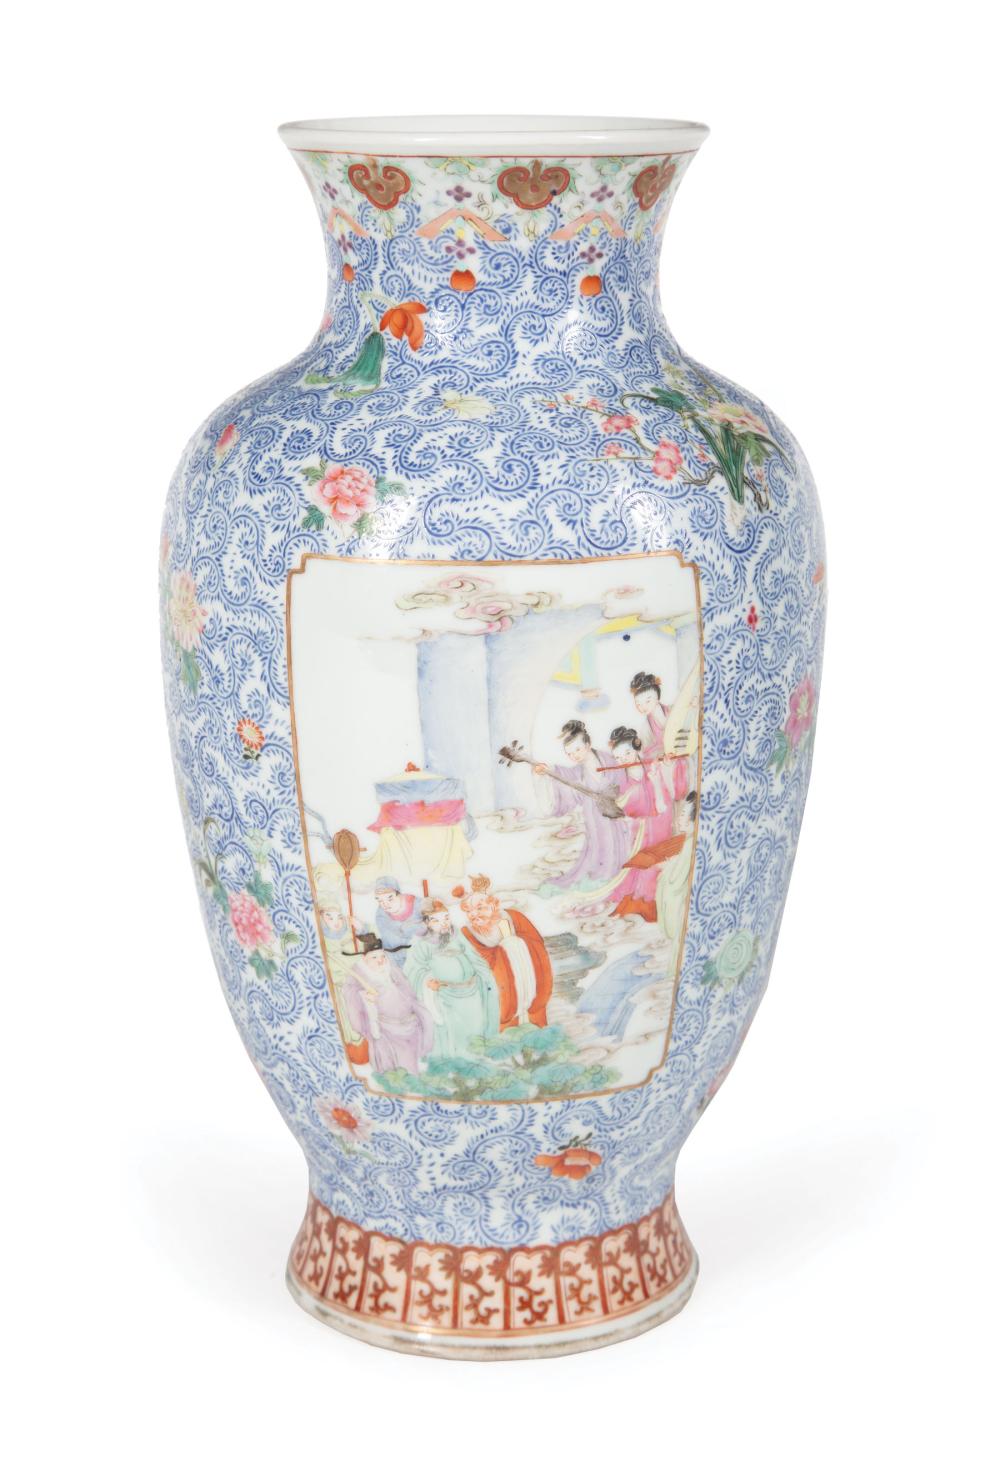 CHINESE FAMILLE ROSE PORCELAIN 3193dc